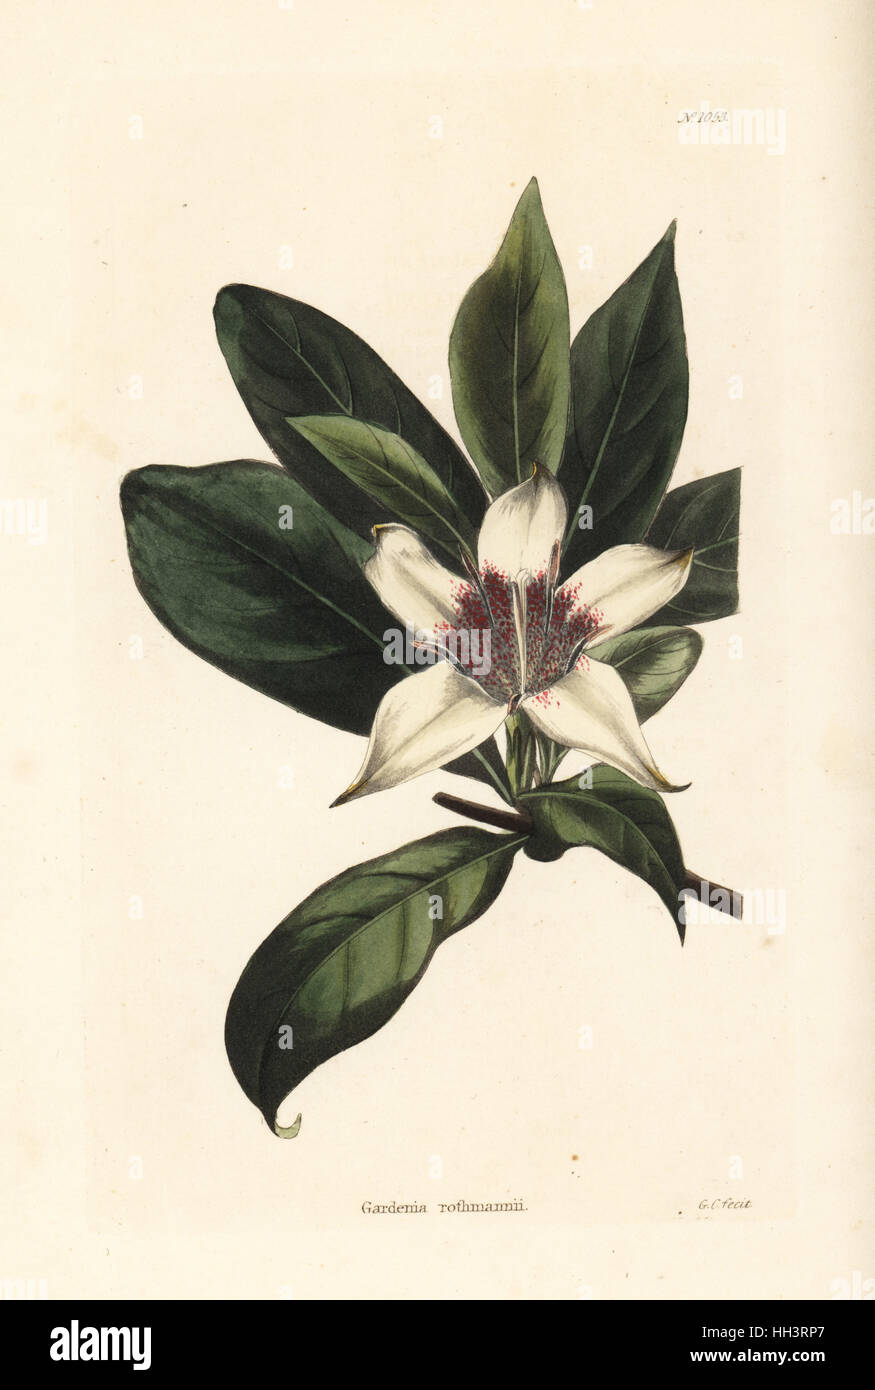 Bell gardenia, Rothmannia capensis (Gardenia rothmannii). Handcoloured copperplate engraving by George Cooke from Conrad Loddiges' Botanical Cabinet, Hackney, 1825. Stock Photo